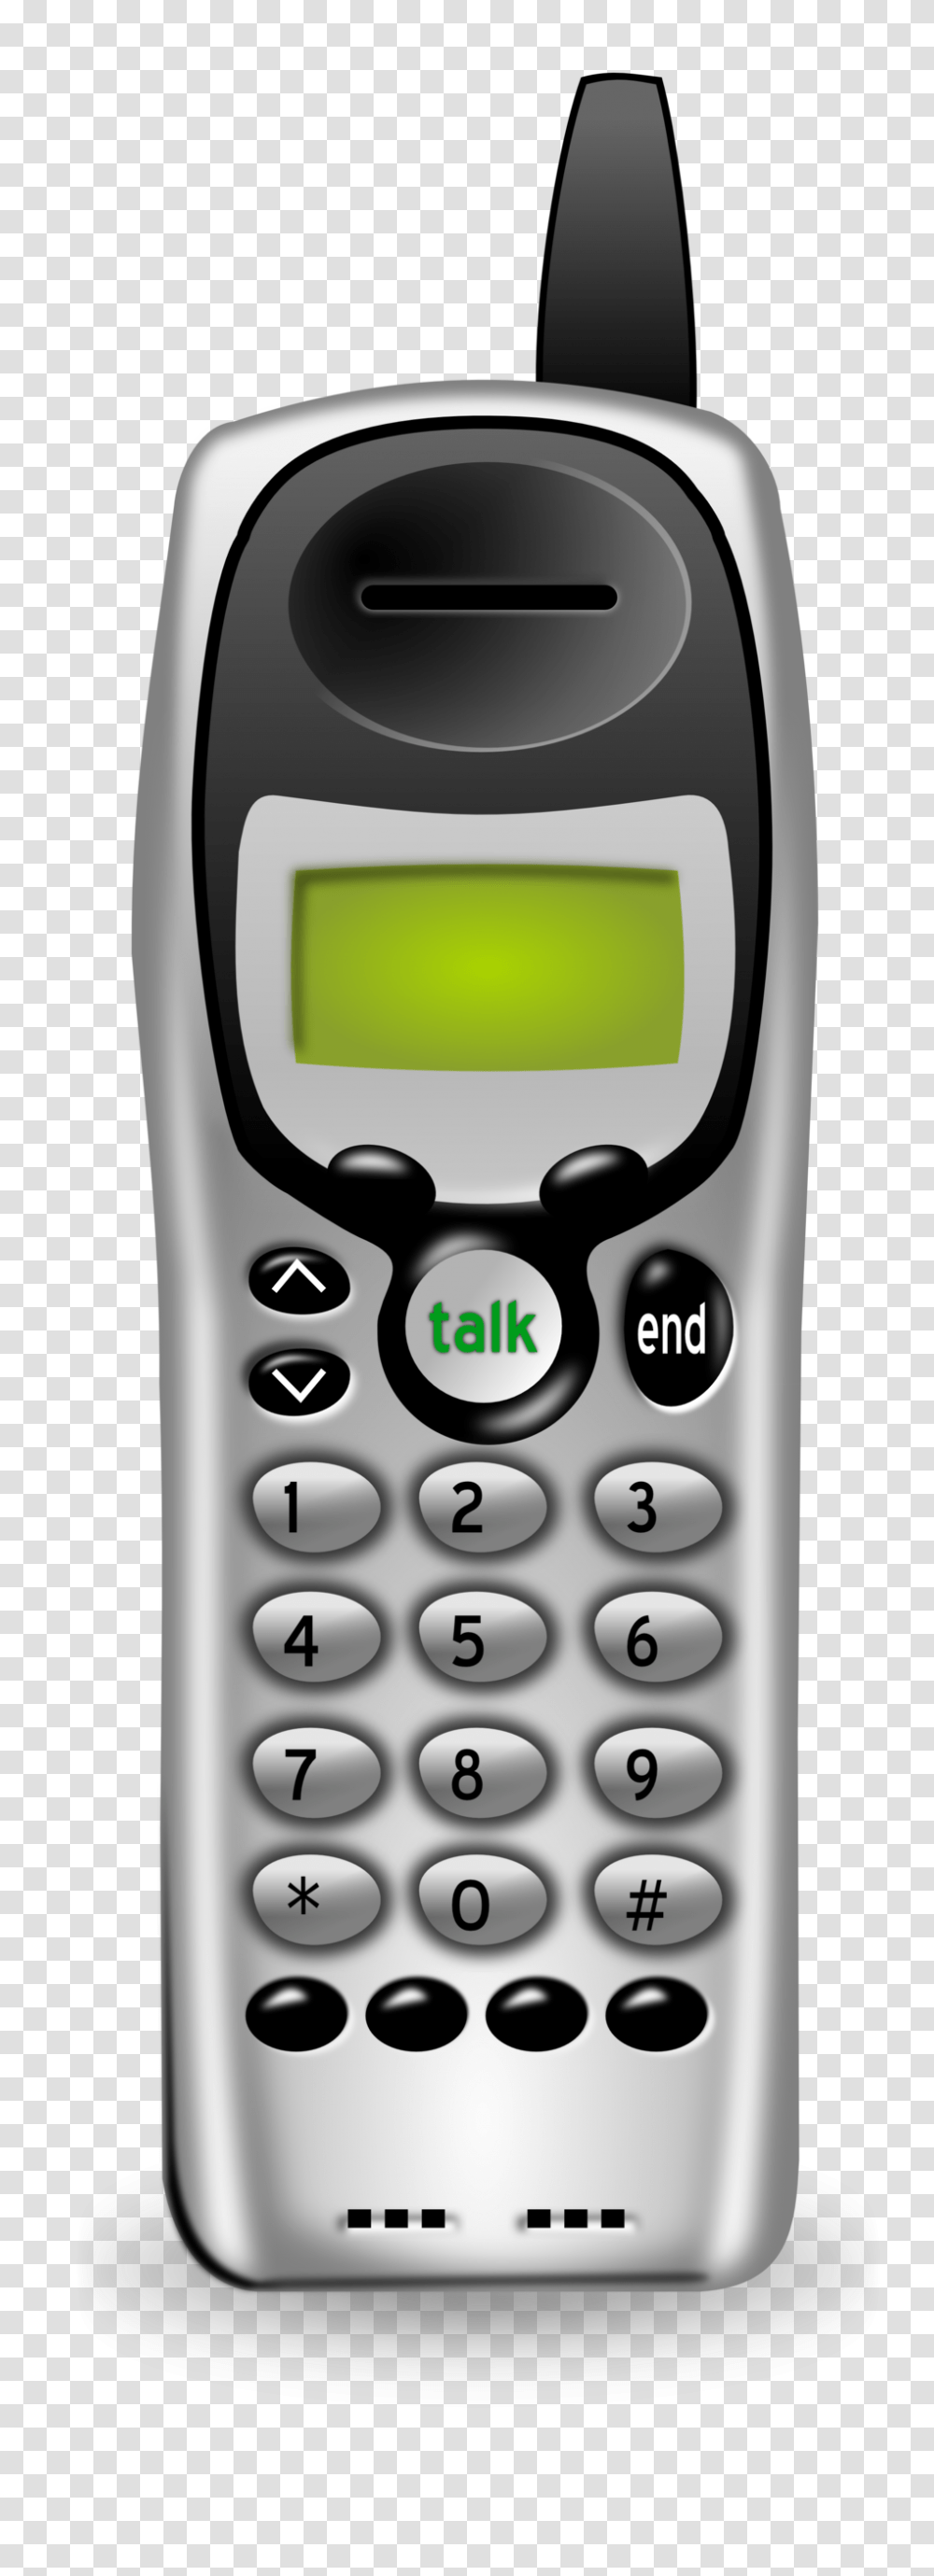 Cellphone Clipart Cordless Telephone Cordless Phone Clipart, Electronics, Mobile Phone, Cell Phone, Calculator Transparent Png